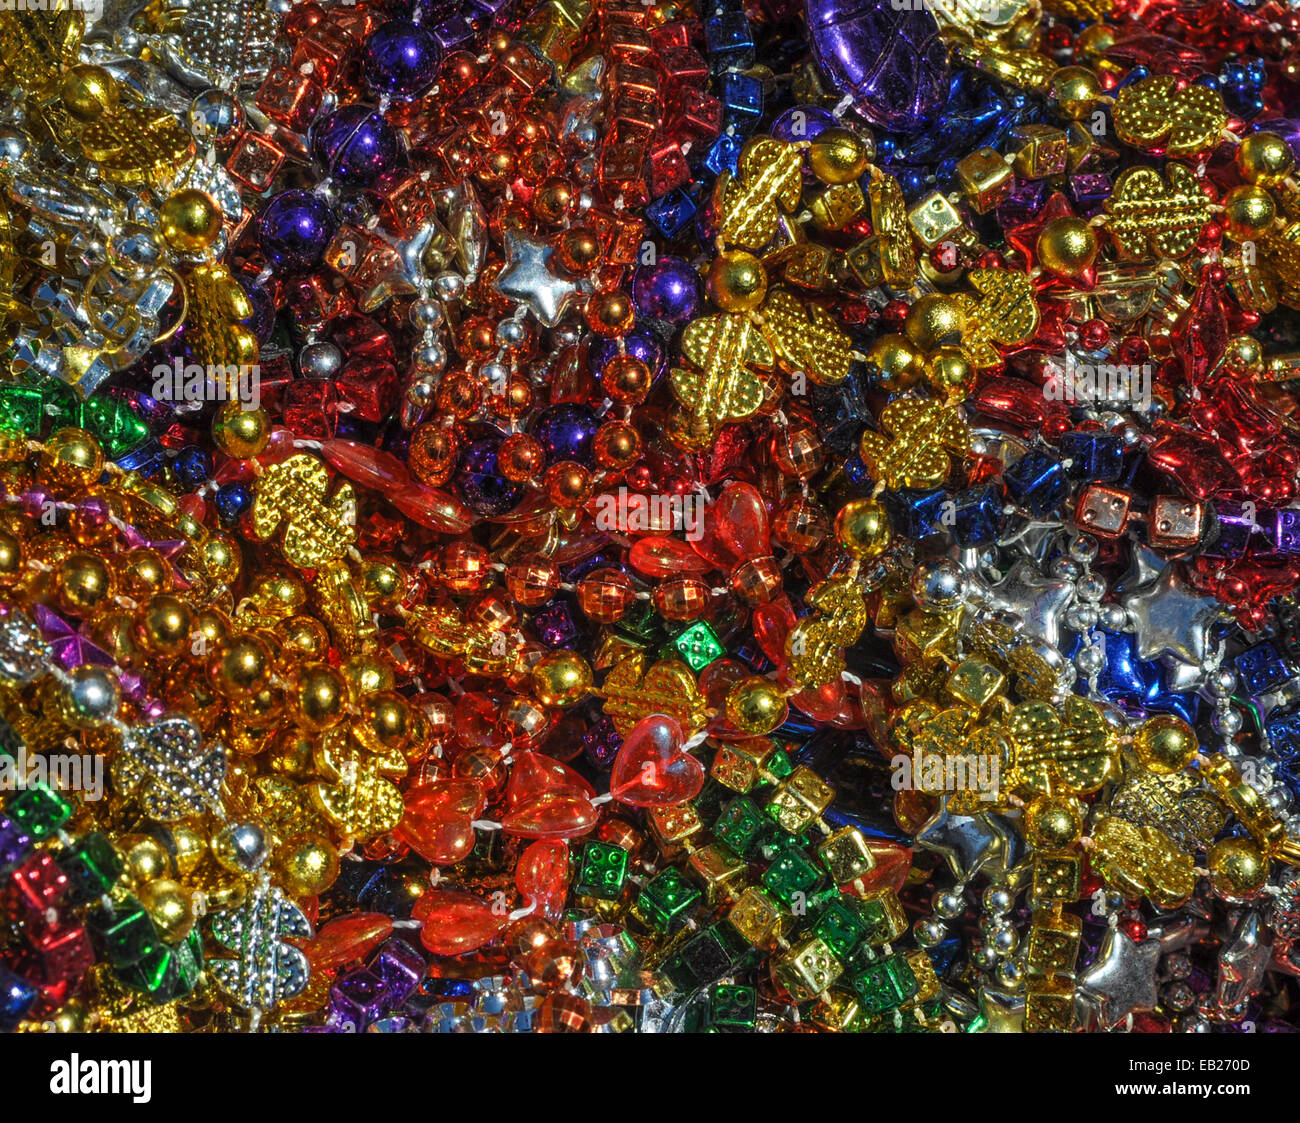 Background made up of mulit-colored including gold, purple, blue, green and pink mardi gras beads Stock Photo